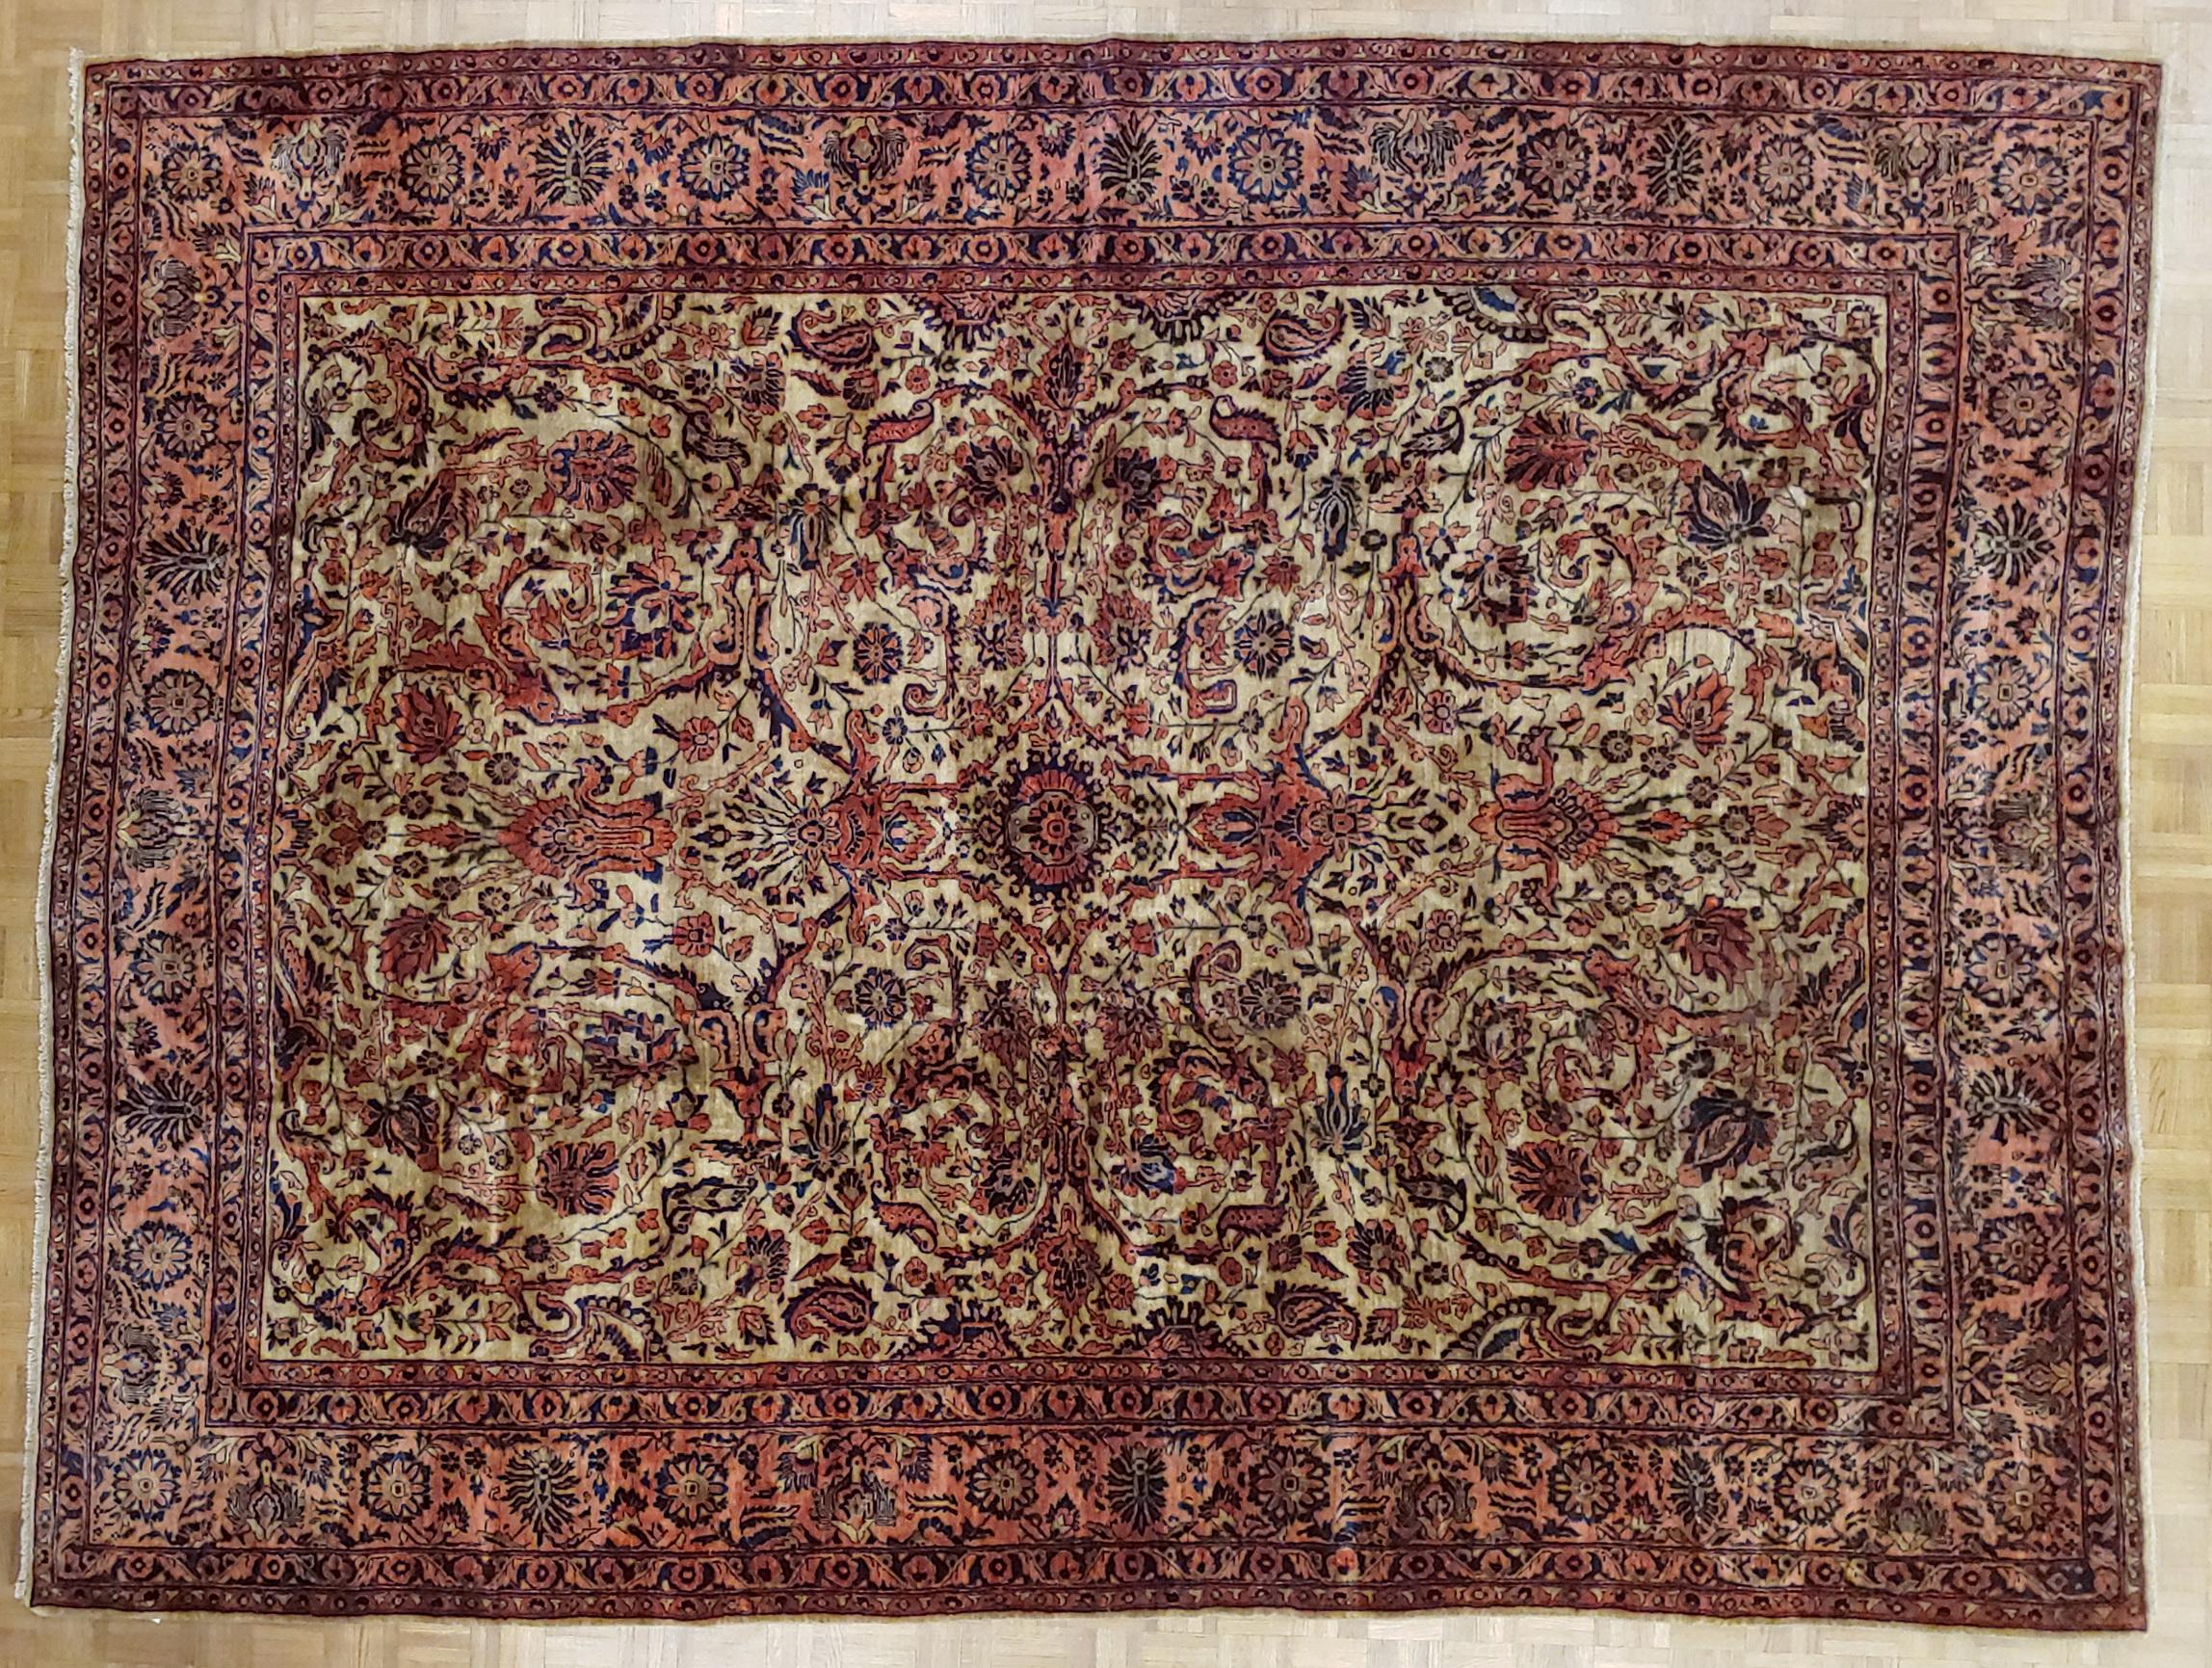 Antique Persian Sarouk, Floral Design, Gold Background, Wool, Room Size, 1915 For Sale 1